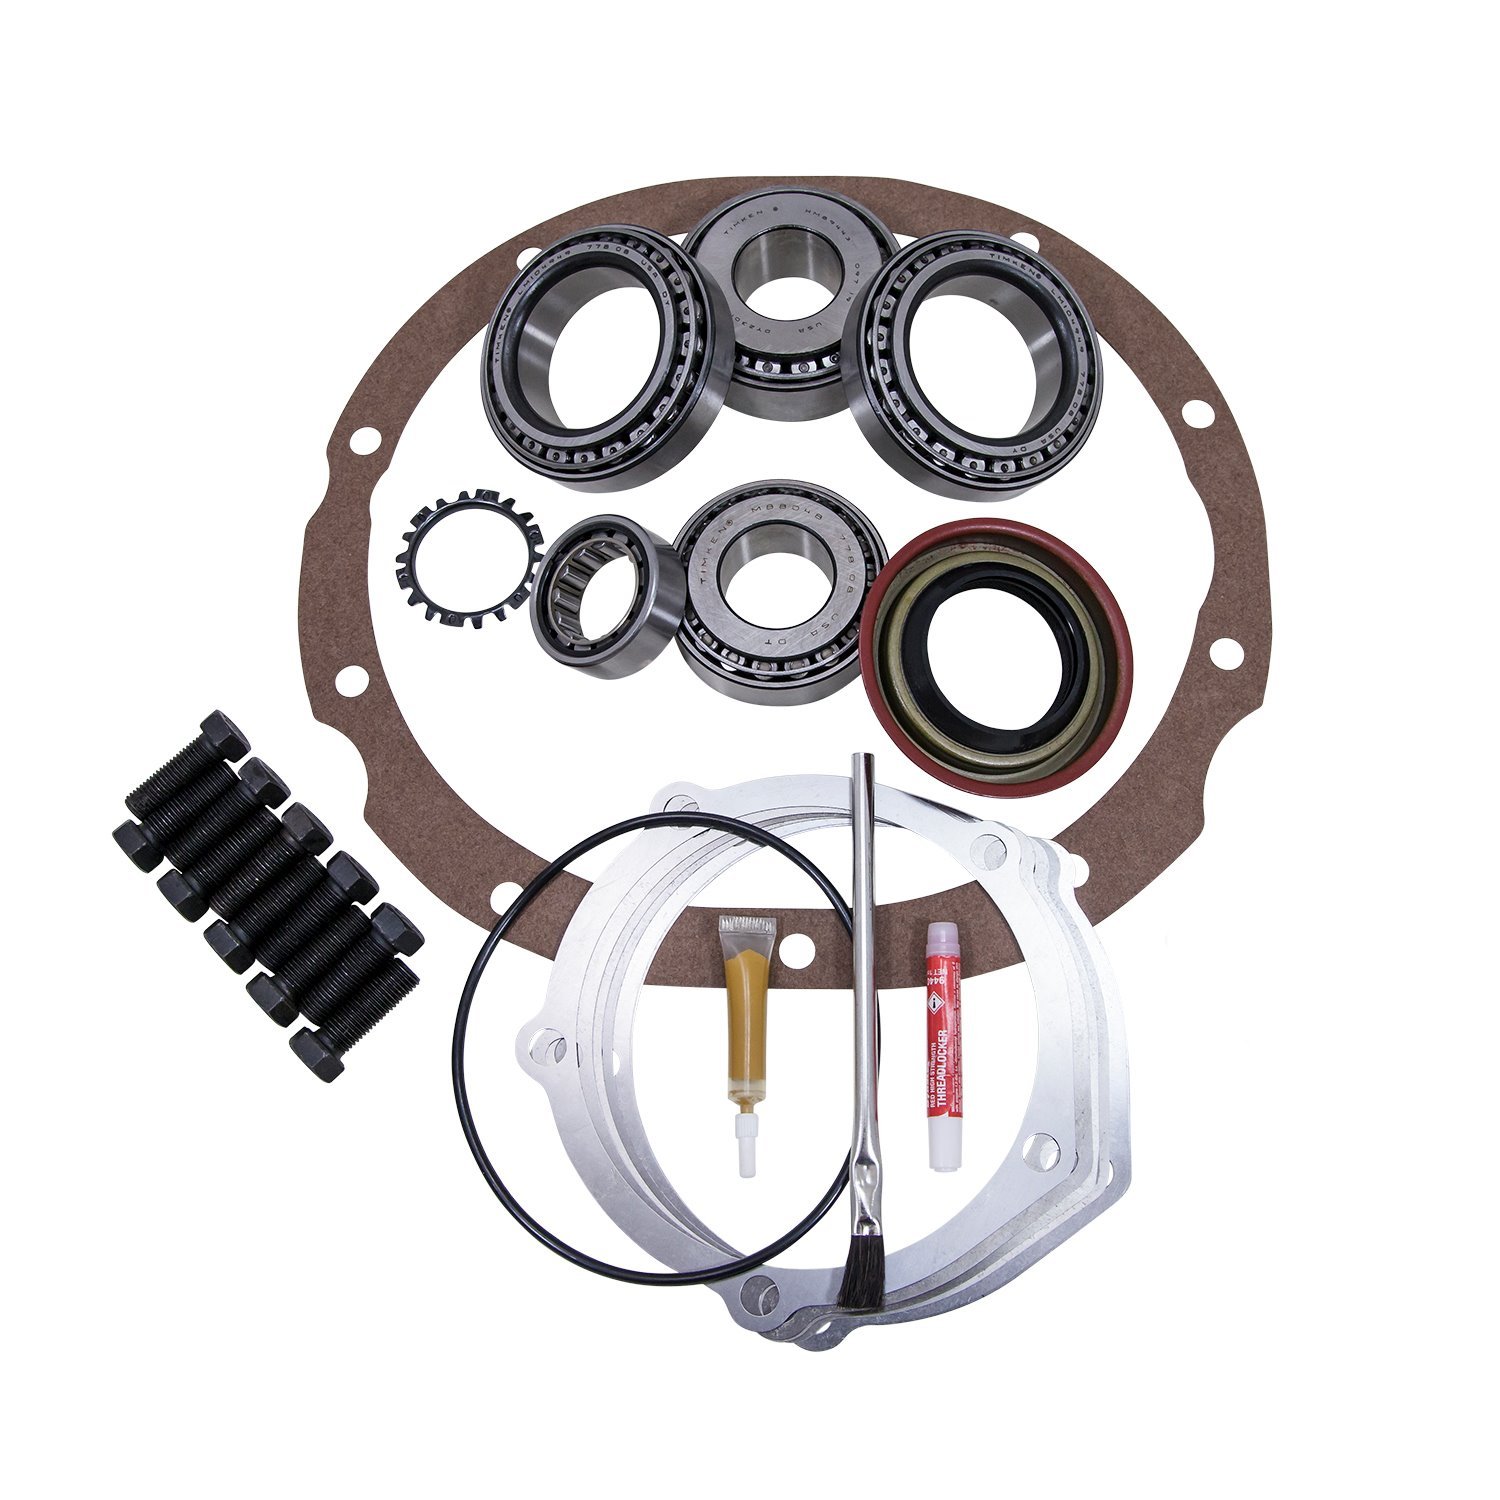 Master Overhaul Kit For Ford 9 in. Lm104911